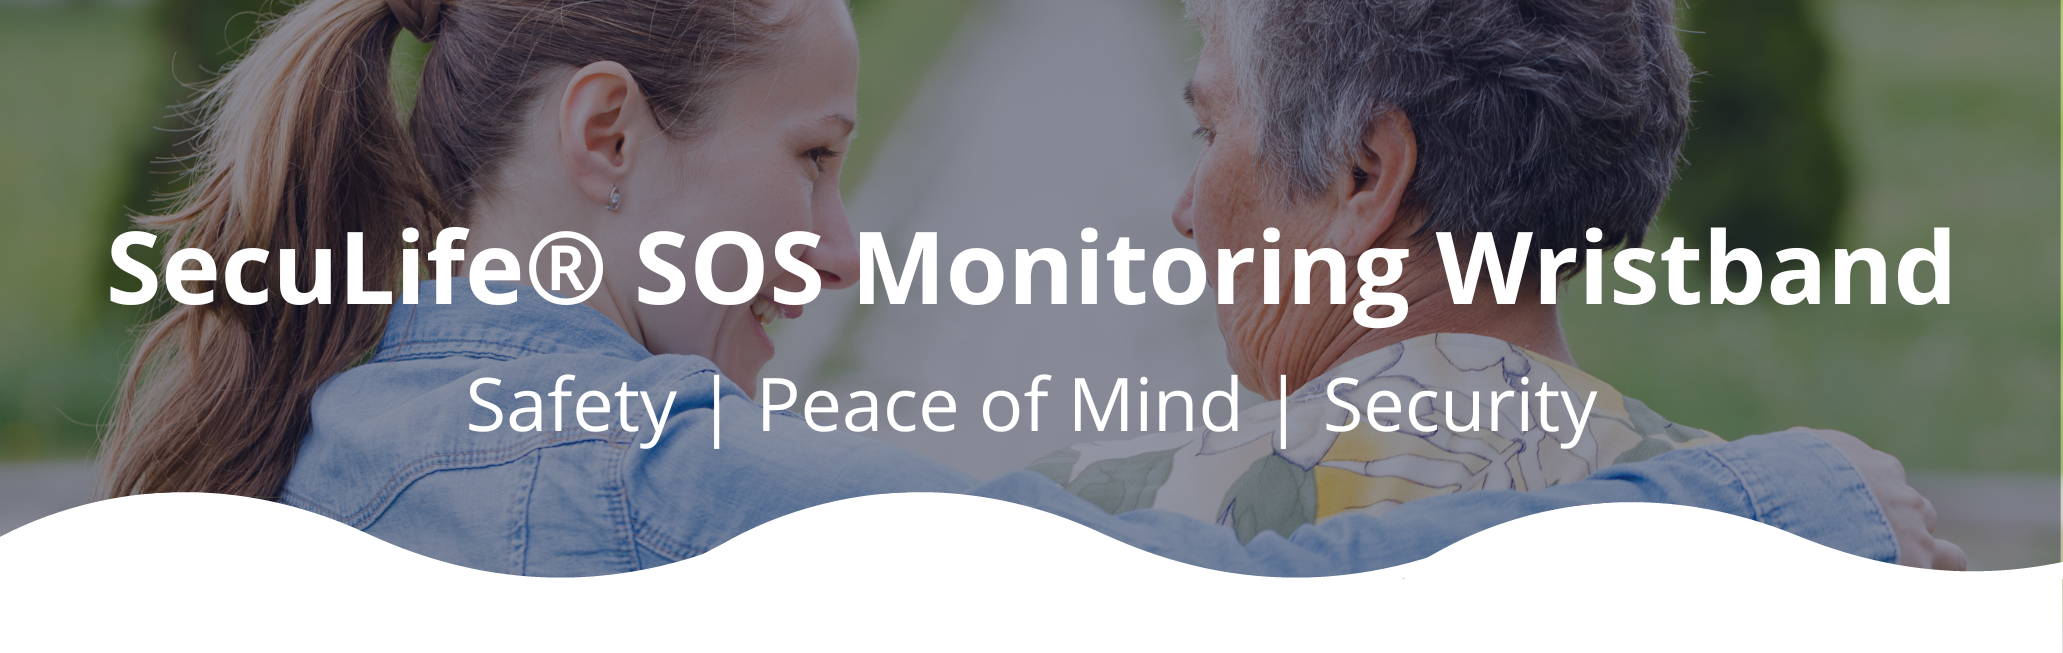 Header for the SOS Monitoring Wristband